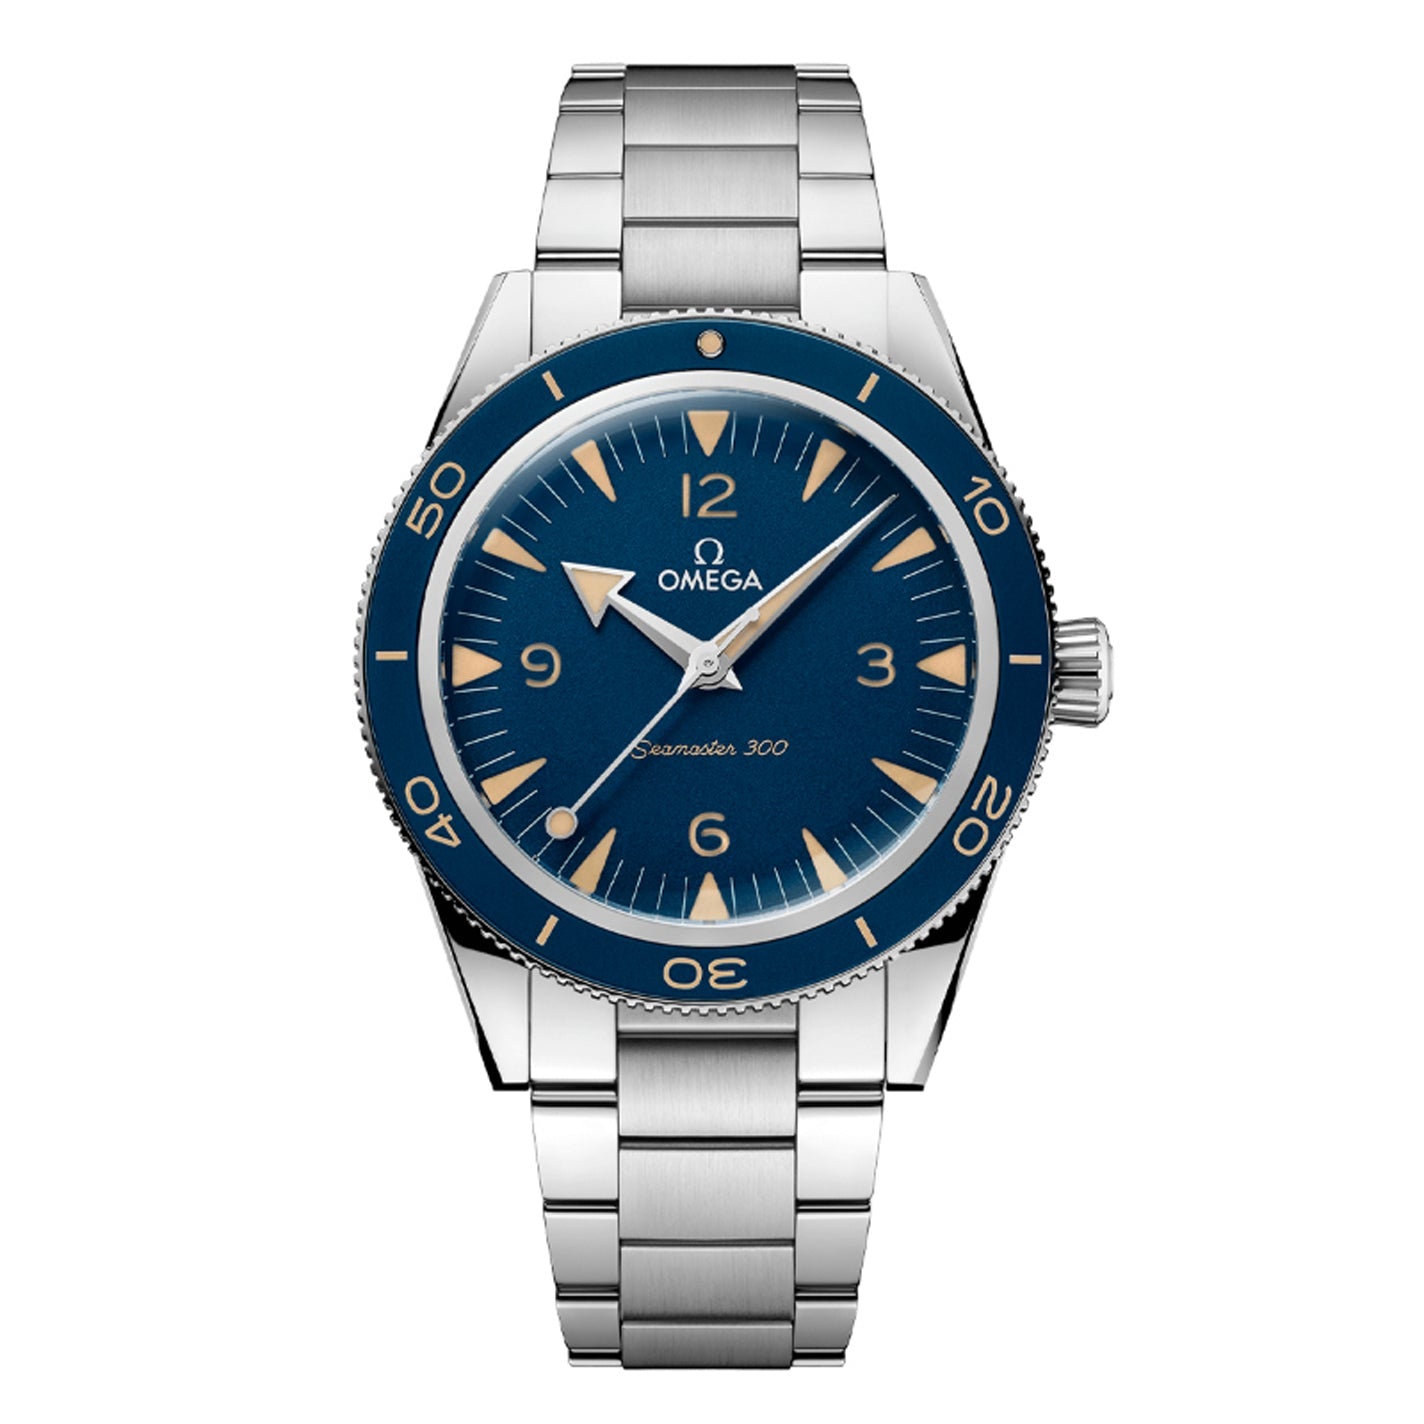 OMEGA Seamaster 300 Co-Axial Master Chronometer 41mm Watch